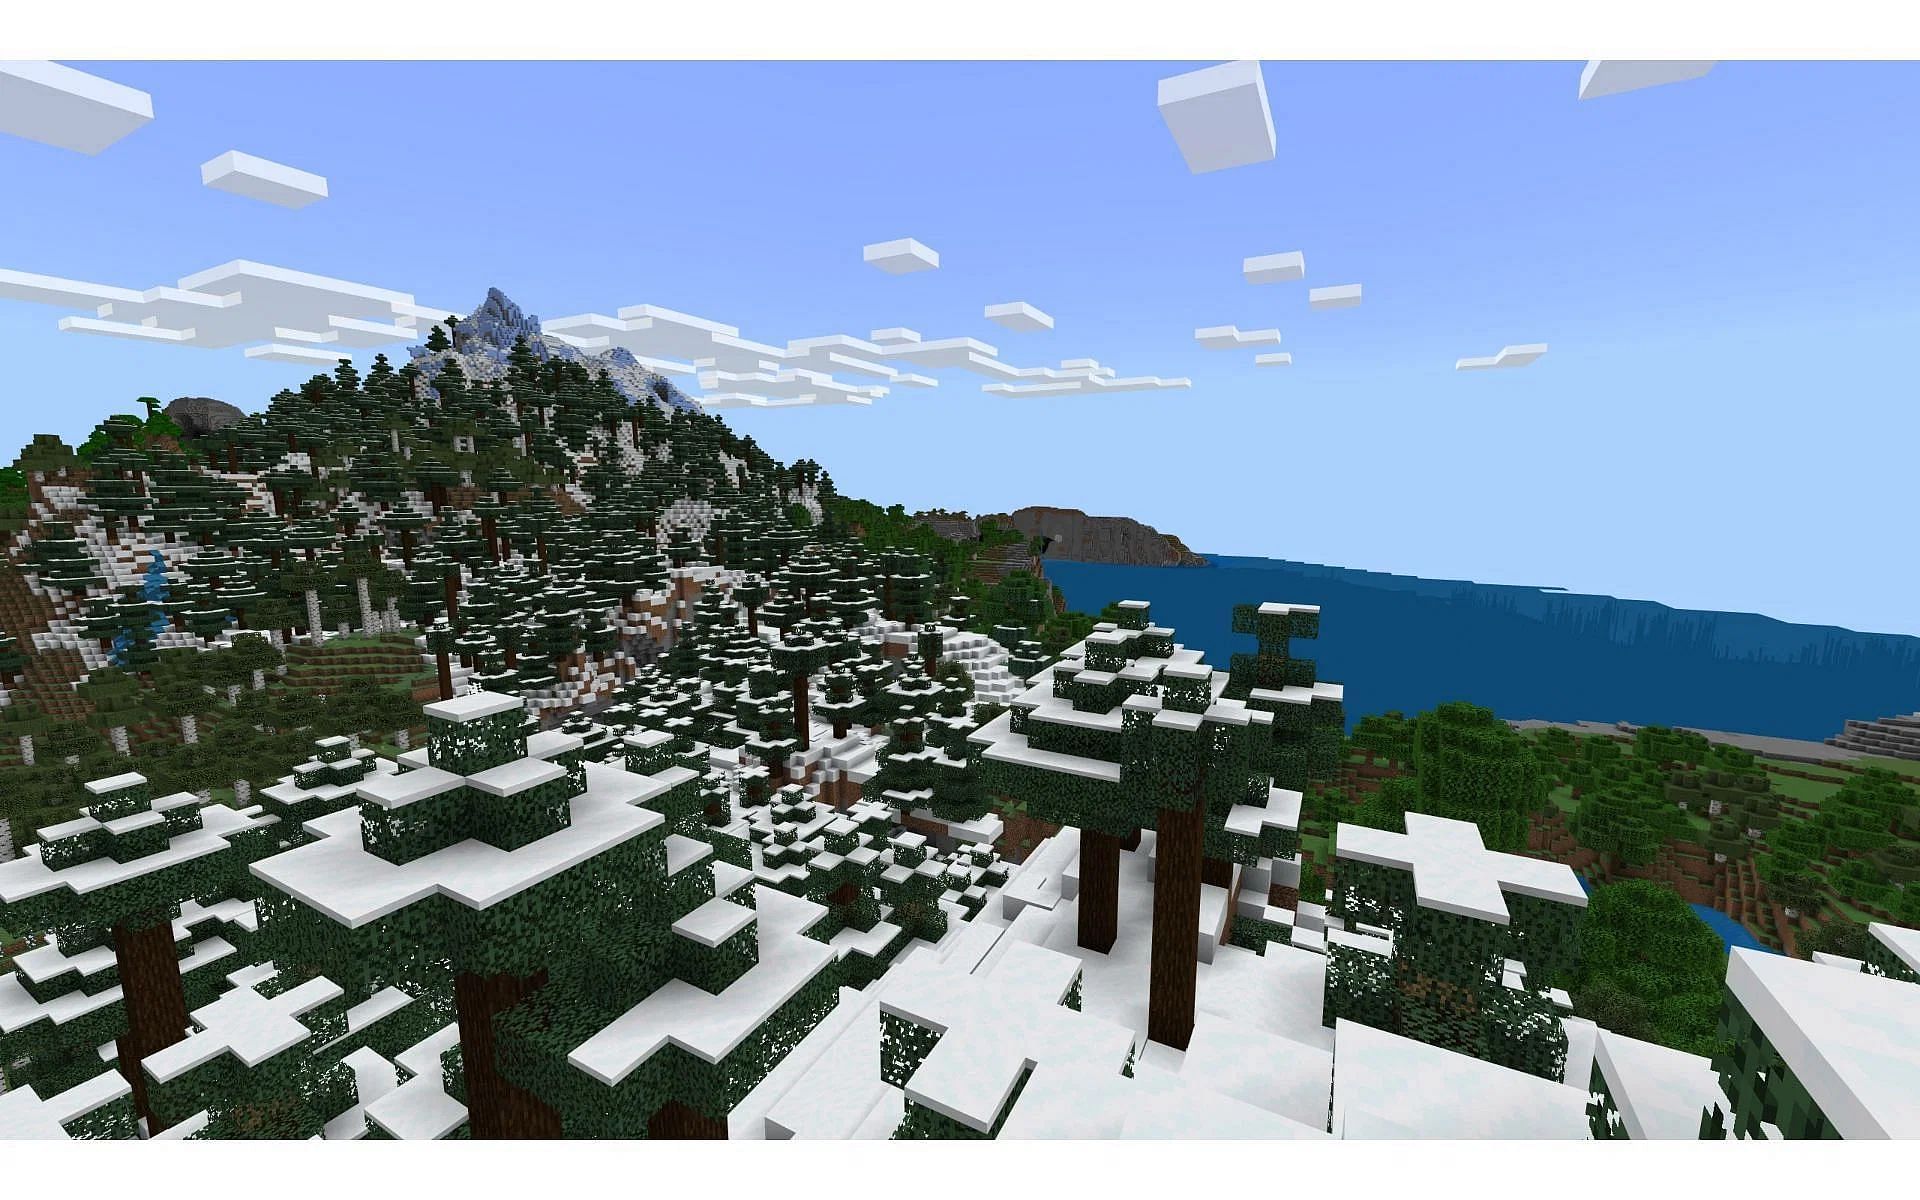 Players can find the terrifying ancient city below the serene snowy peaks (Image via Mojang)